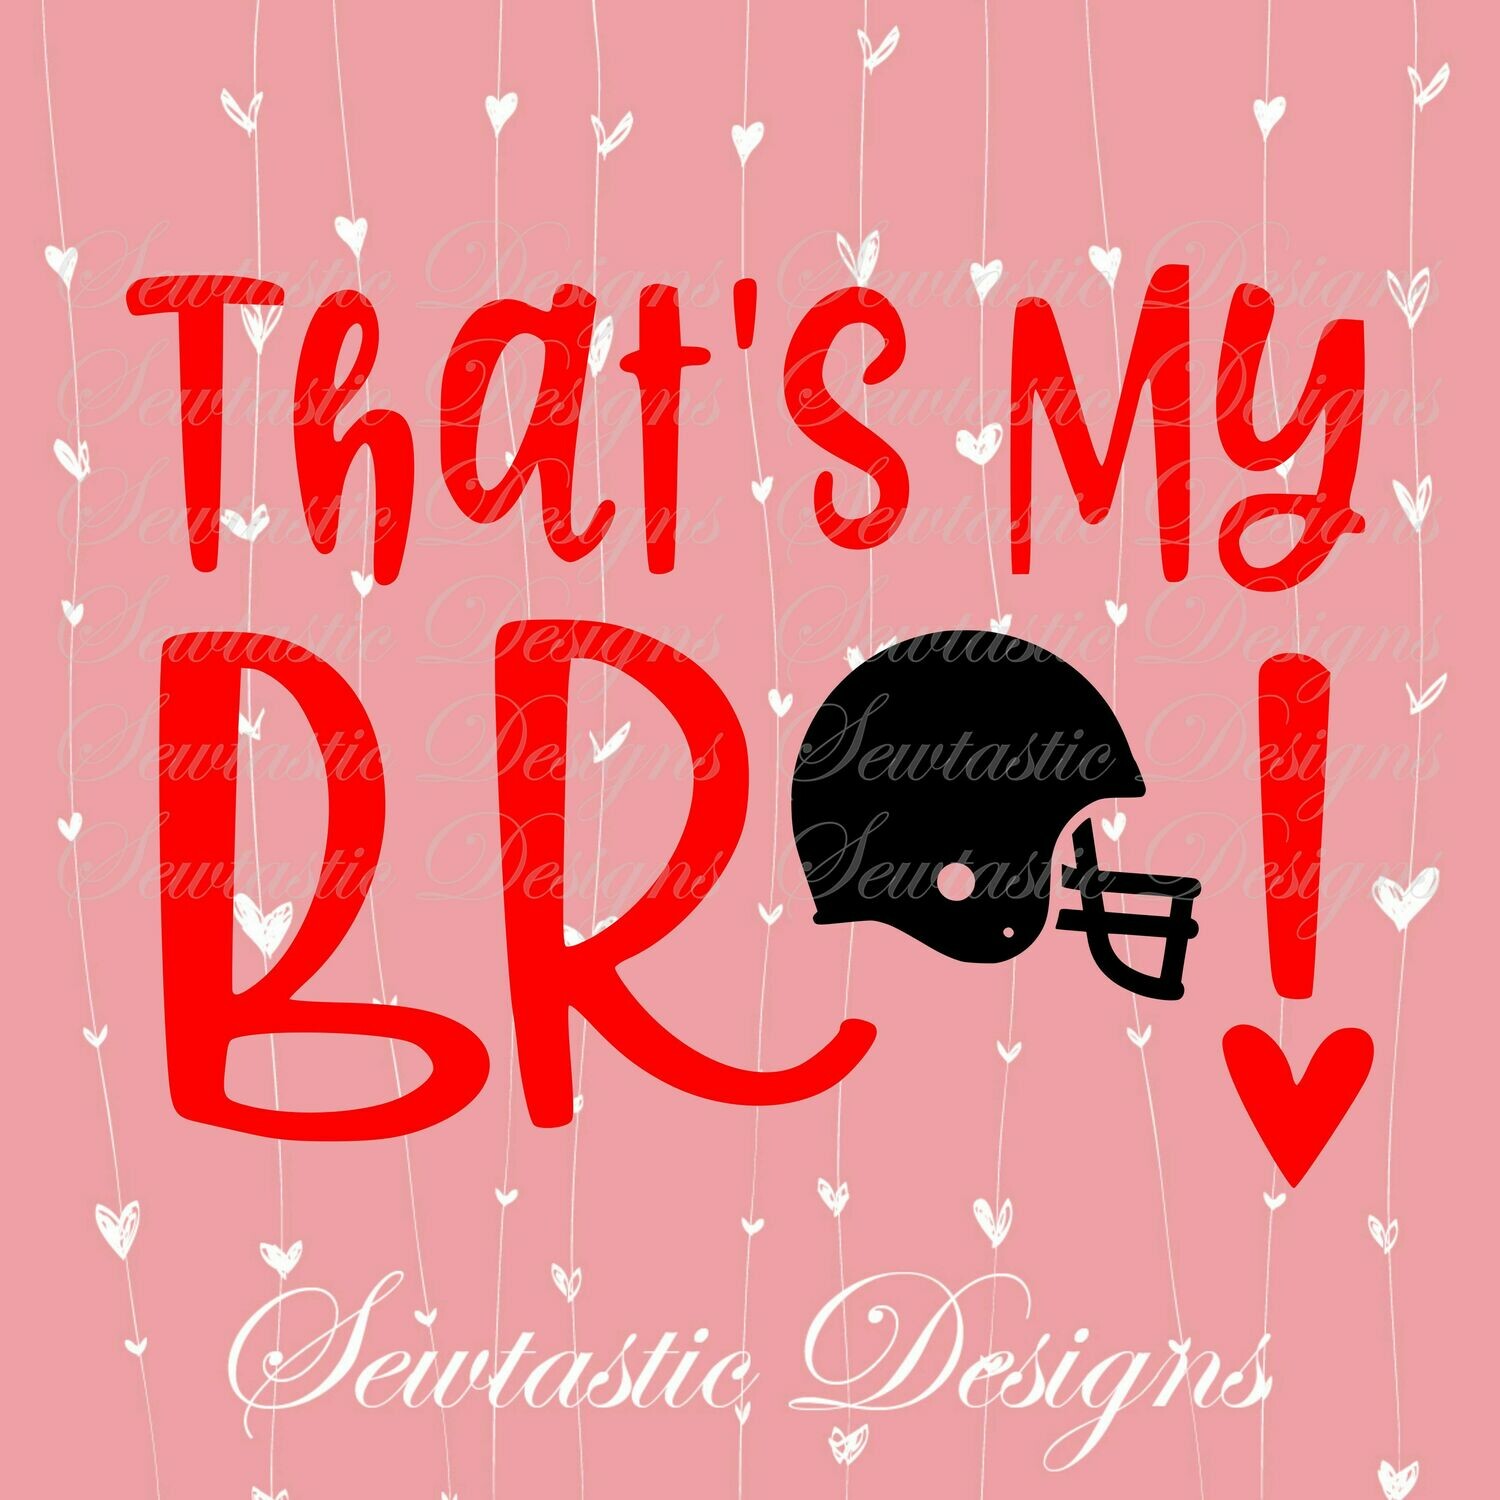 That&#39;s My Bro SVG, Football SVG, Helmet SVG, My Bro SVG, Brother SVG, Cut File, Iron On, Decal, Cricut, Silhouette, ScanNCut &amp; Many More.